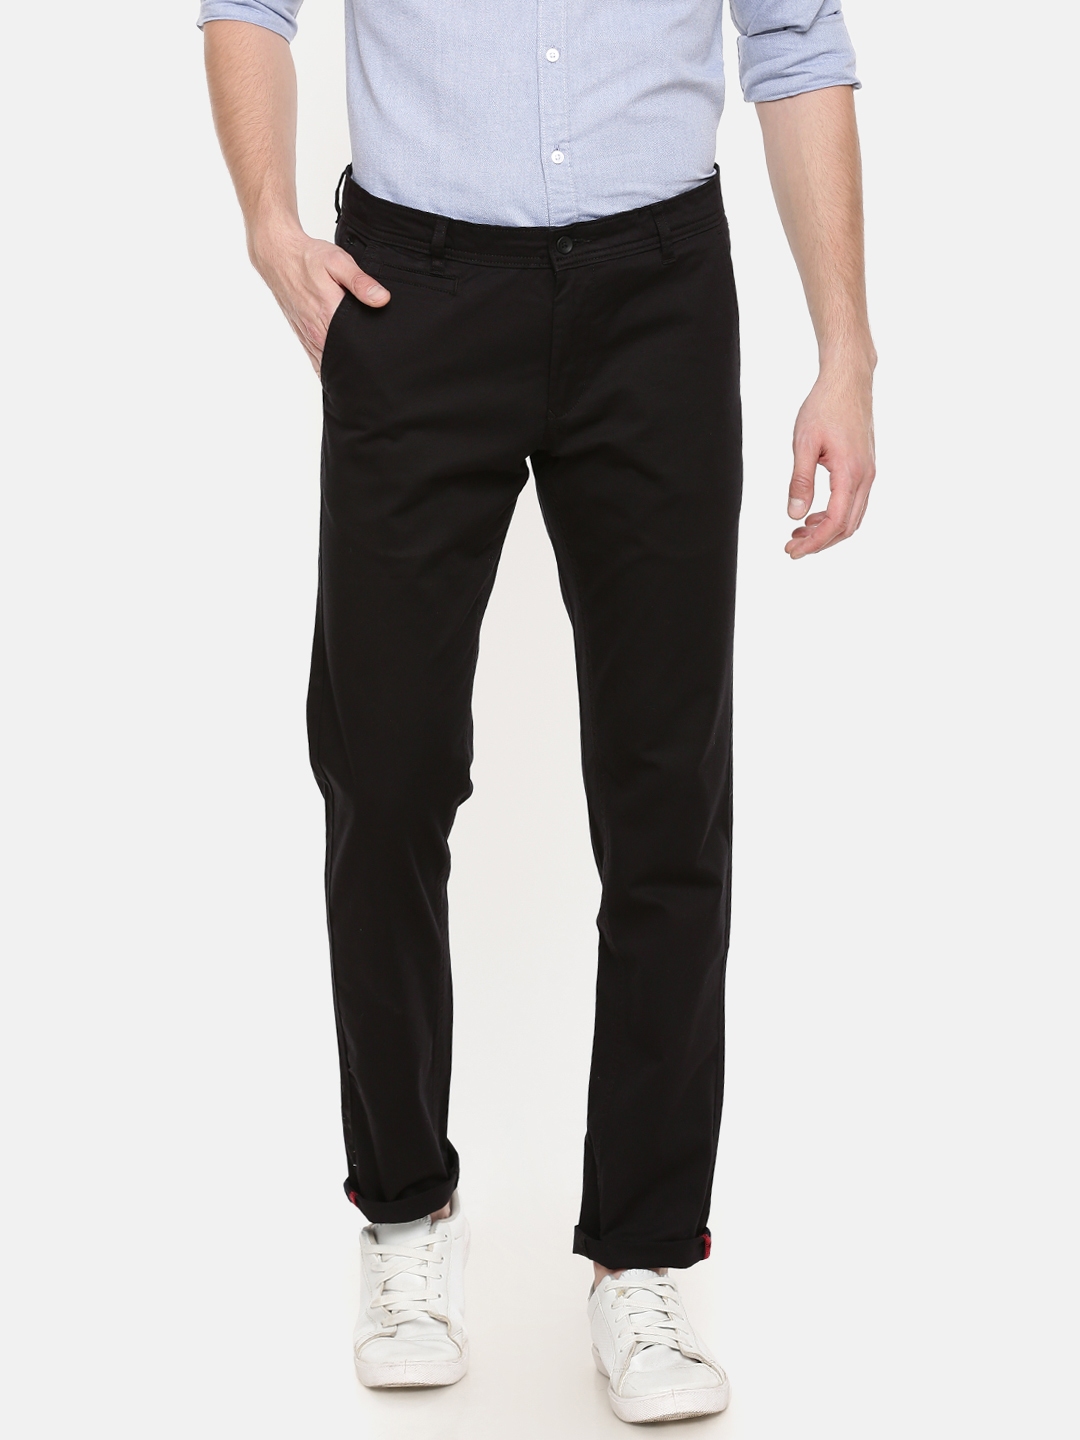 Buy Chennis Men Black Slim Fit Solid Chinos - Trousers for Men 7777657 ...